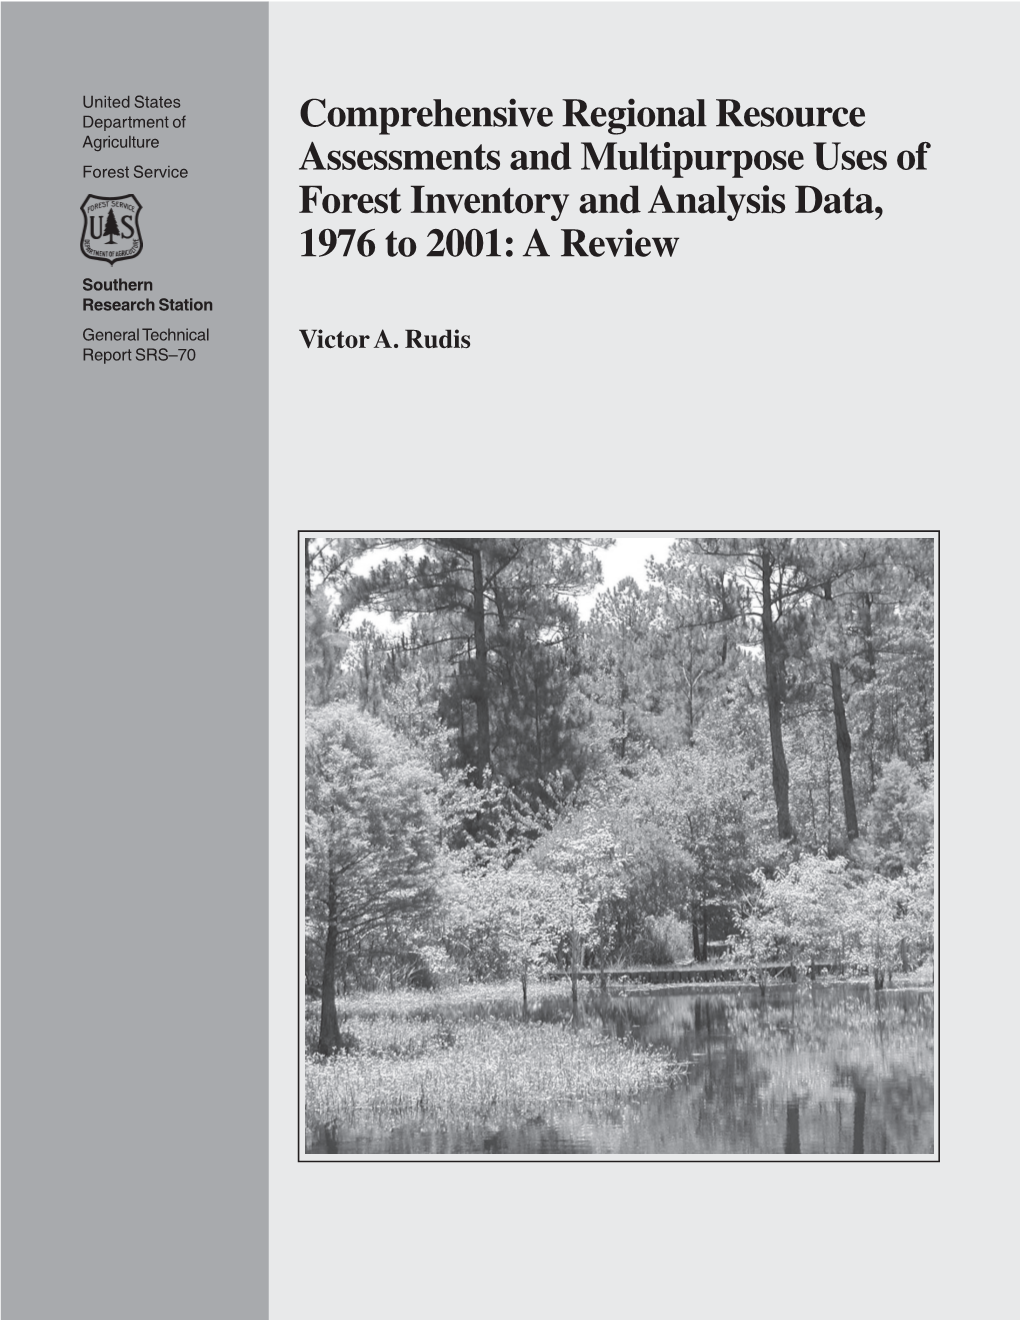 Comprehensive Regional Resource Assessments and Multipurpose Uses of Forest Inventory and Analysis Data, 1976 to 2001: a Review